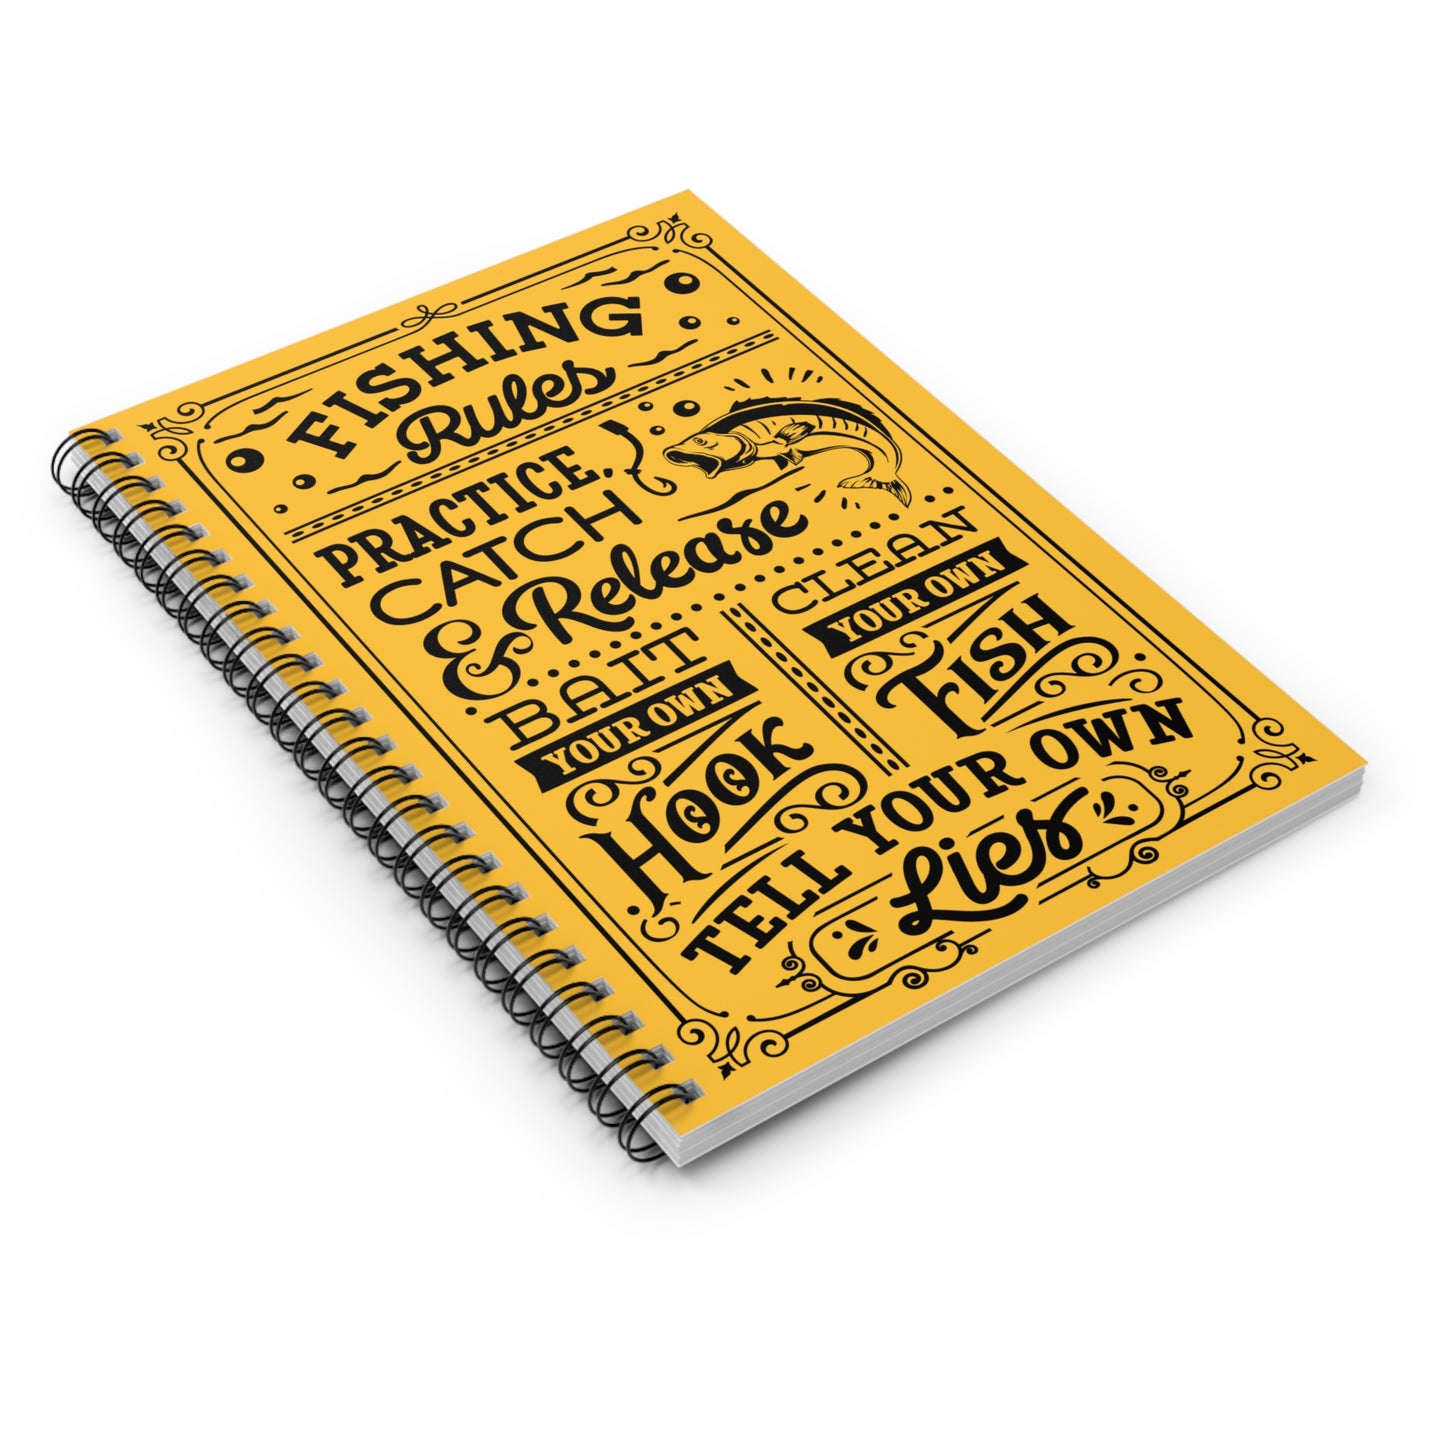 Fishing Rules: Spiral Notebook - Log Books - Journals - Diaries - and More Custom Printed by TheGlassyLass.com